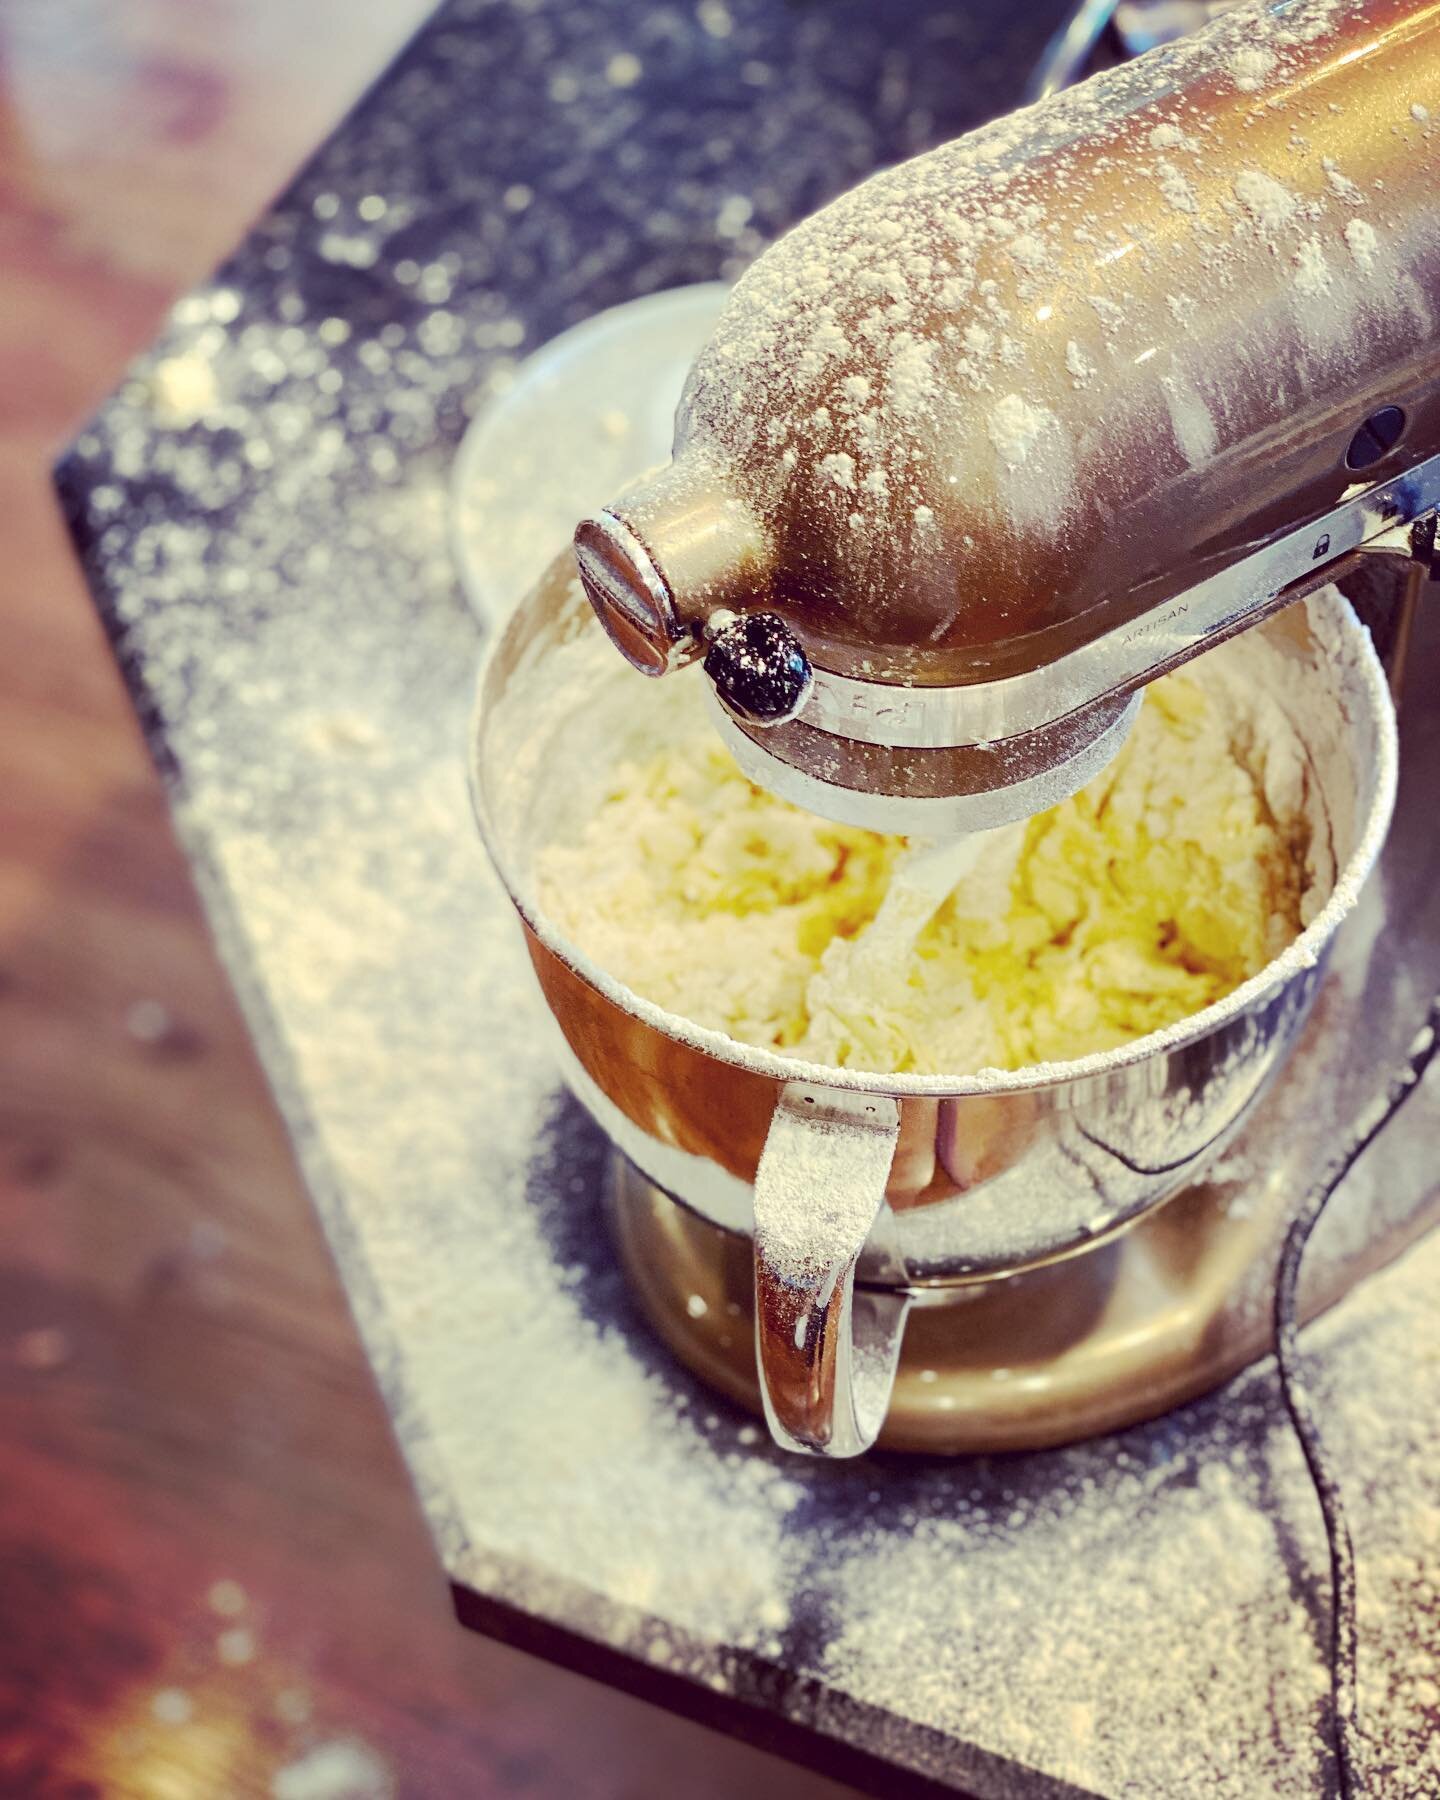 Turns out the lock switch was the one on the 𝘳𝘪𝘨𝘩𝘵. #protip⁣
⁣
The good news is that when 𝘢𝘭𝘭 of the flour explodes out, it&rsquo;s easy to calculate how much needs to be added back in. At least the butter cake came out well; thanks for the r